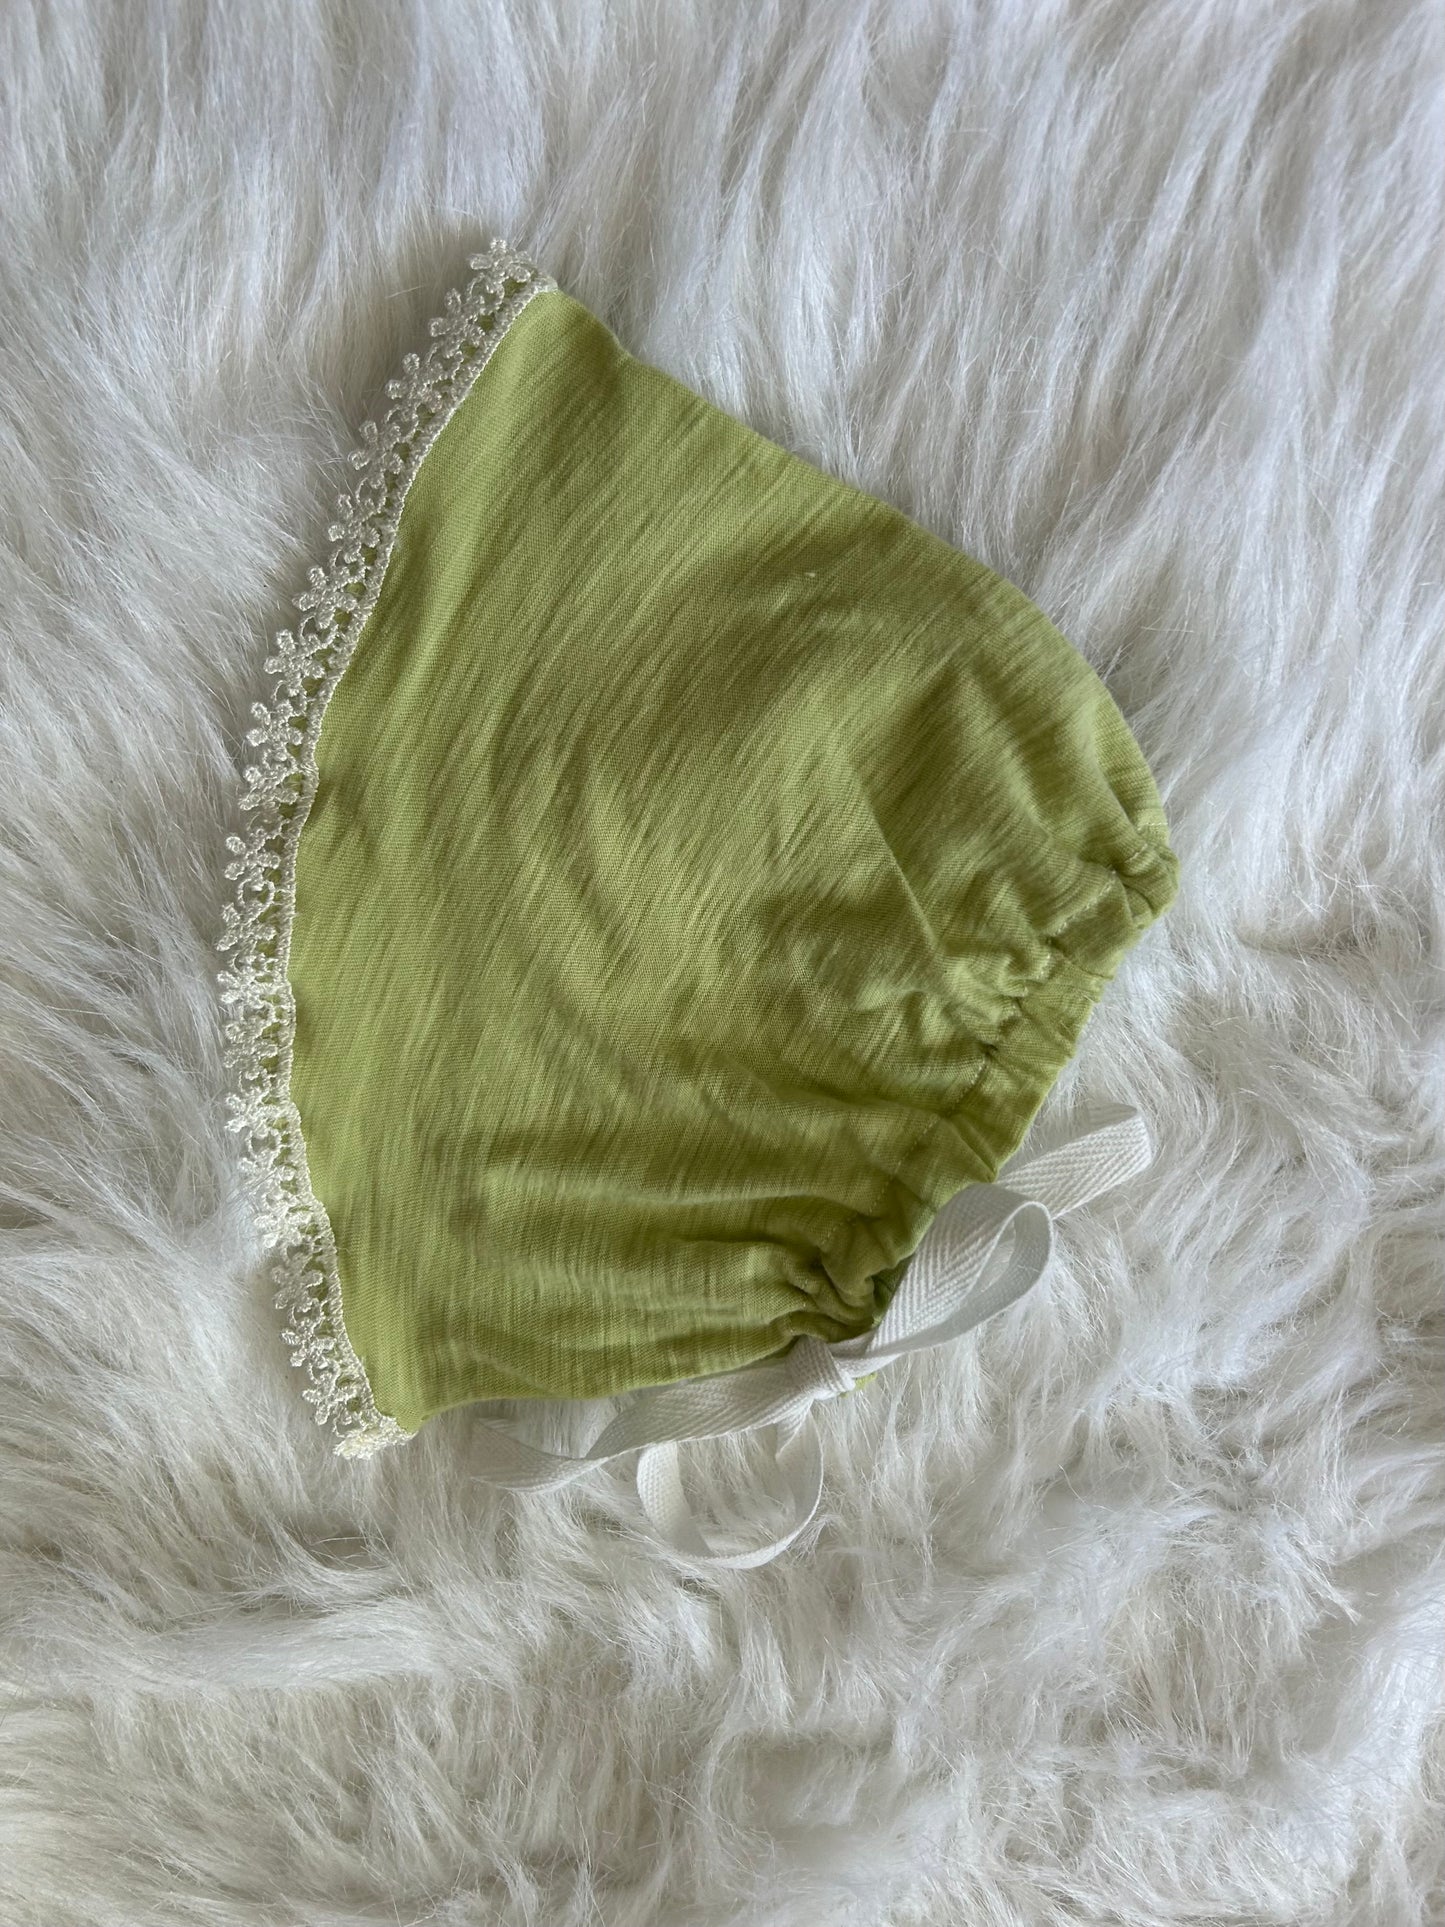 100% cotton lime green with floral trim.